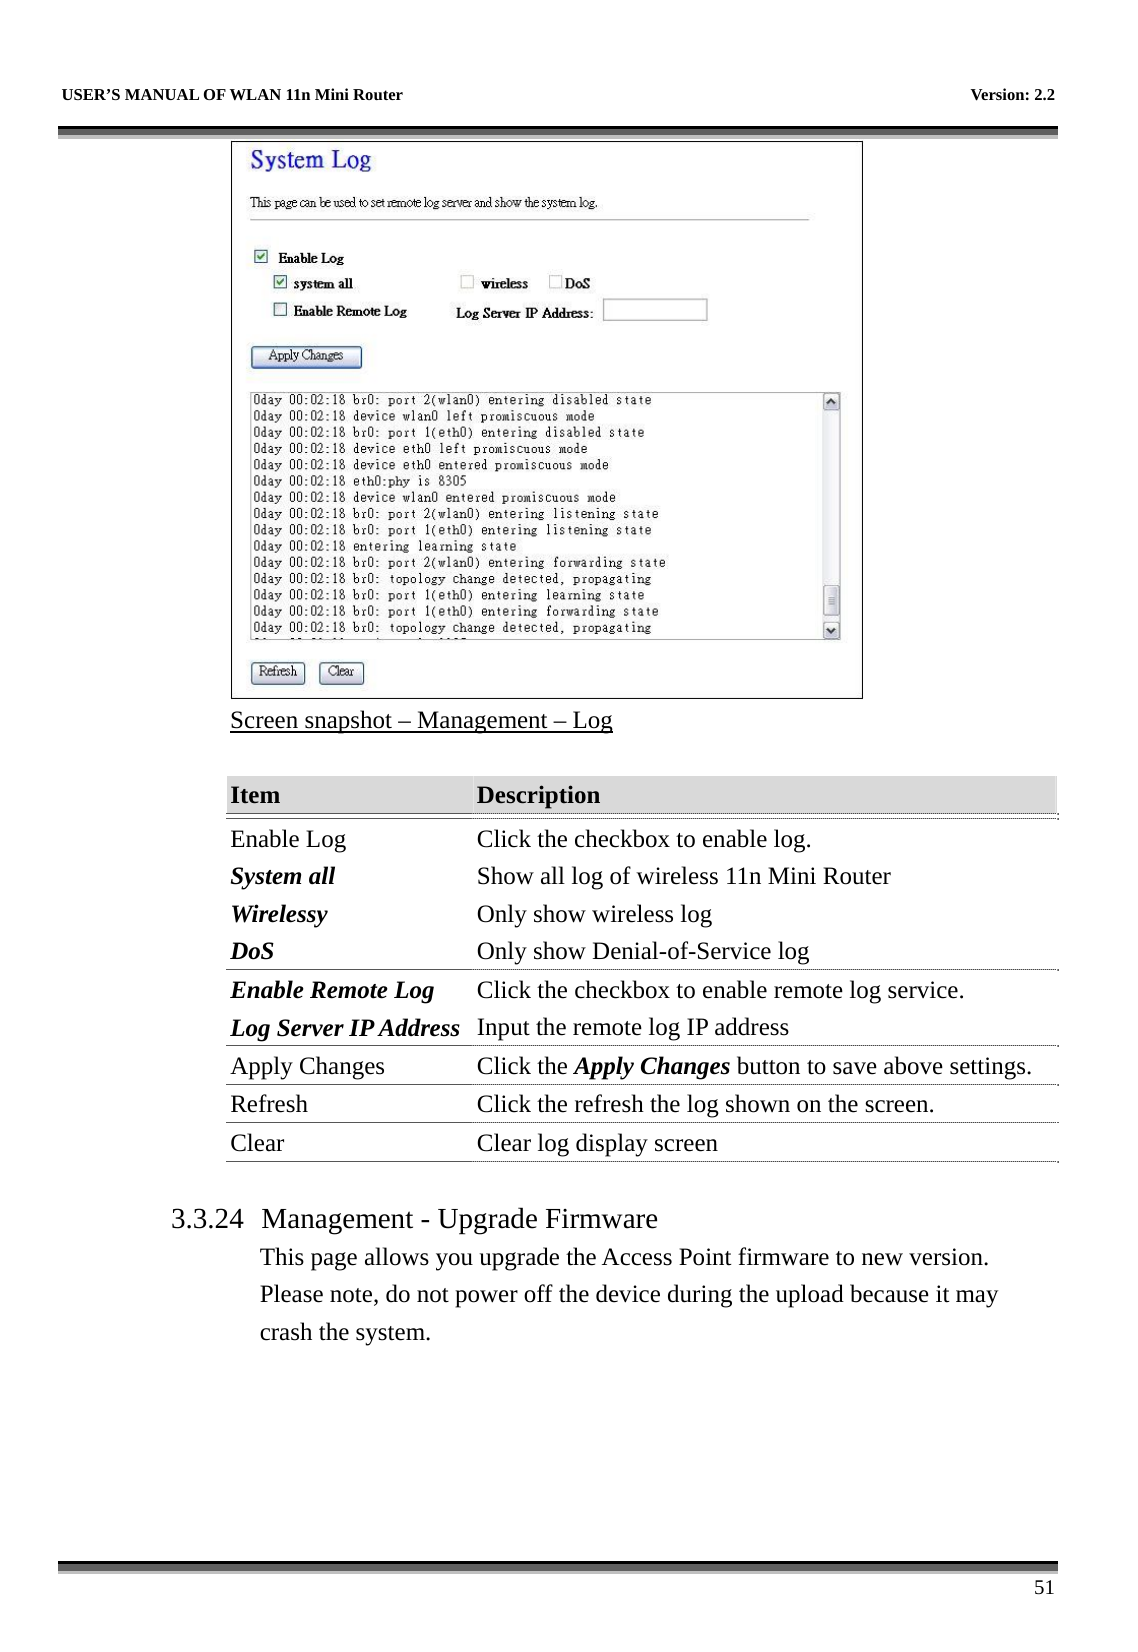   USER’S MANUAL OF WLAN 11n Mini Router    Version: 2.2      51  Screen snapshot – Management – Log  Item  Description   Enable Log System all Wirelessy DoS Click the checkbox to enable log. Show all log of wireless 11n Mini Router Only show wireless log Only show Denial-of-Service log Enable Remote Log Log Server IP Address Click the checkbox to enable remote log service. Input the remote log IP address Apply Changes  Click the Apply Changes button to save above settings. Refresh  Click the refresh the log shown on the screen. Clear  Clear log display screen  3.3.24  Management - Upgrade Firmware This page allows you upgrade the Access Point firmware to new version. Please note, do not power off the device during the upload because it may crash the system.  